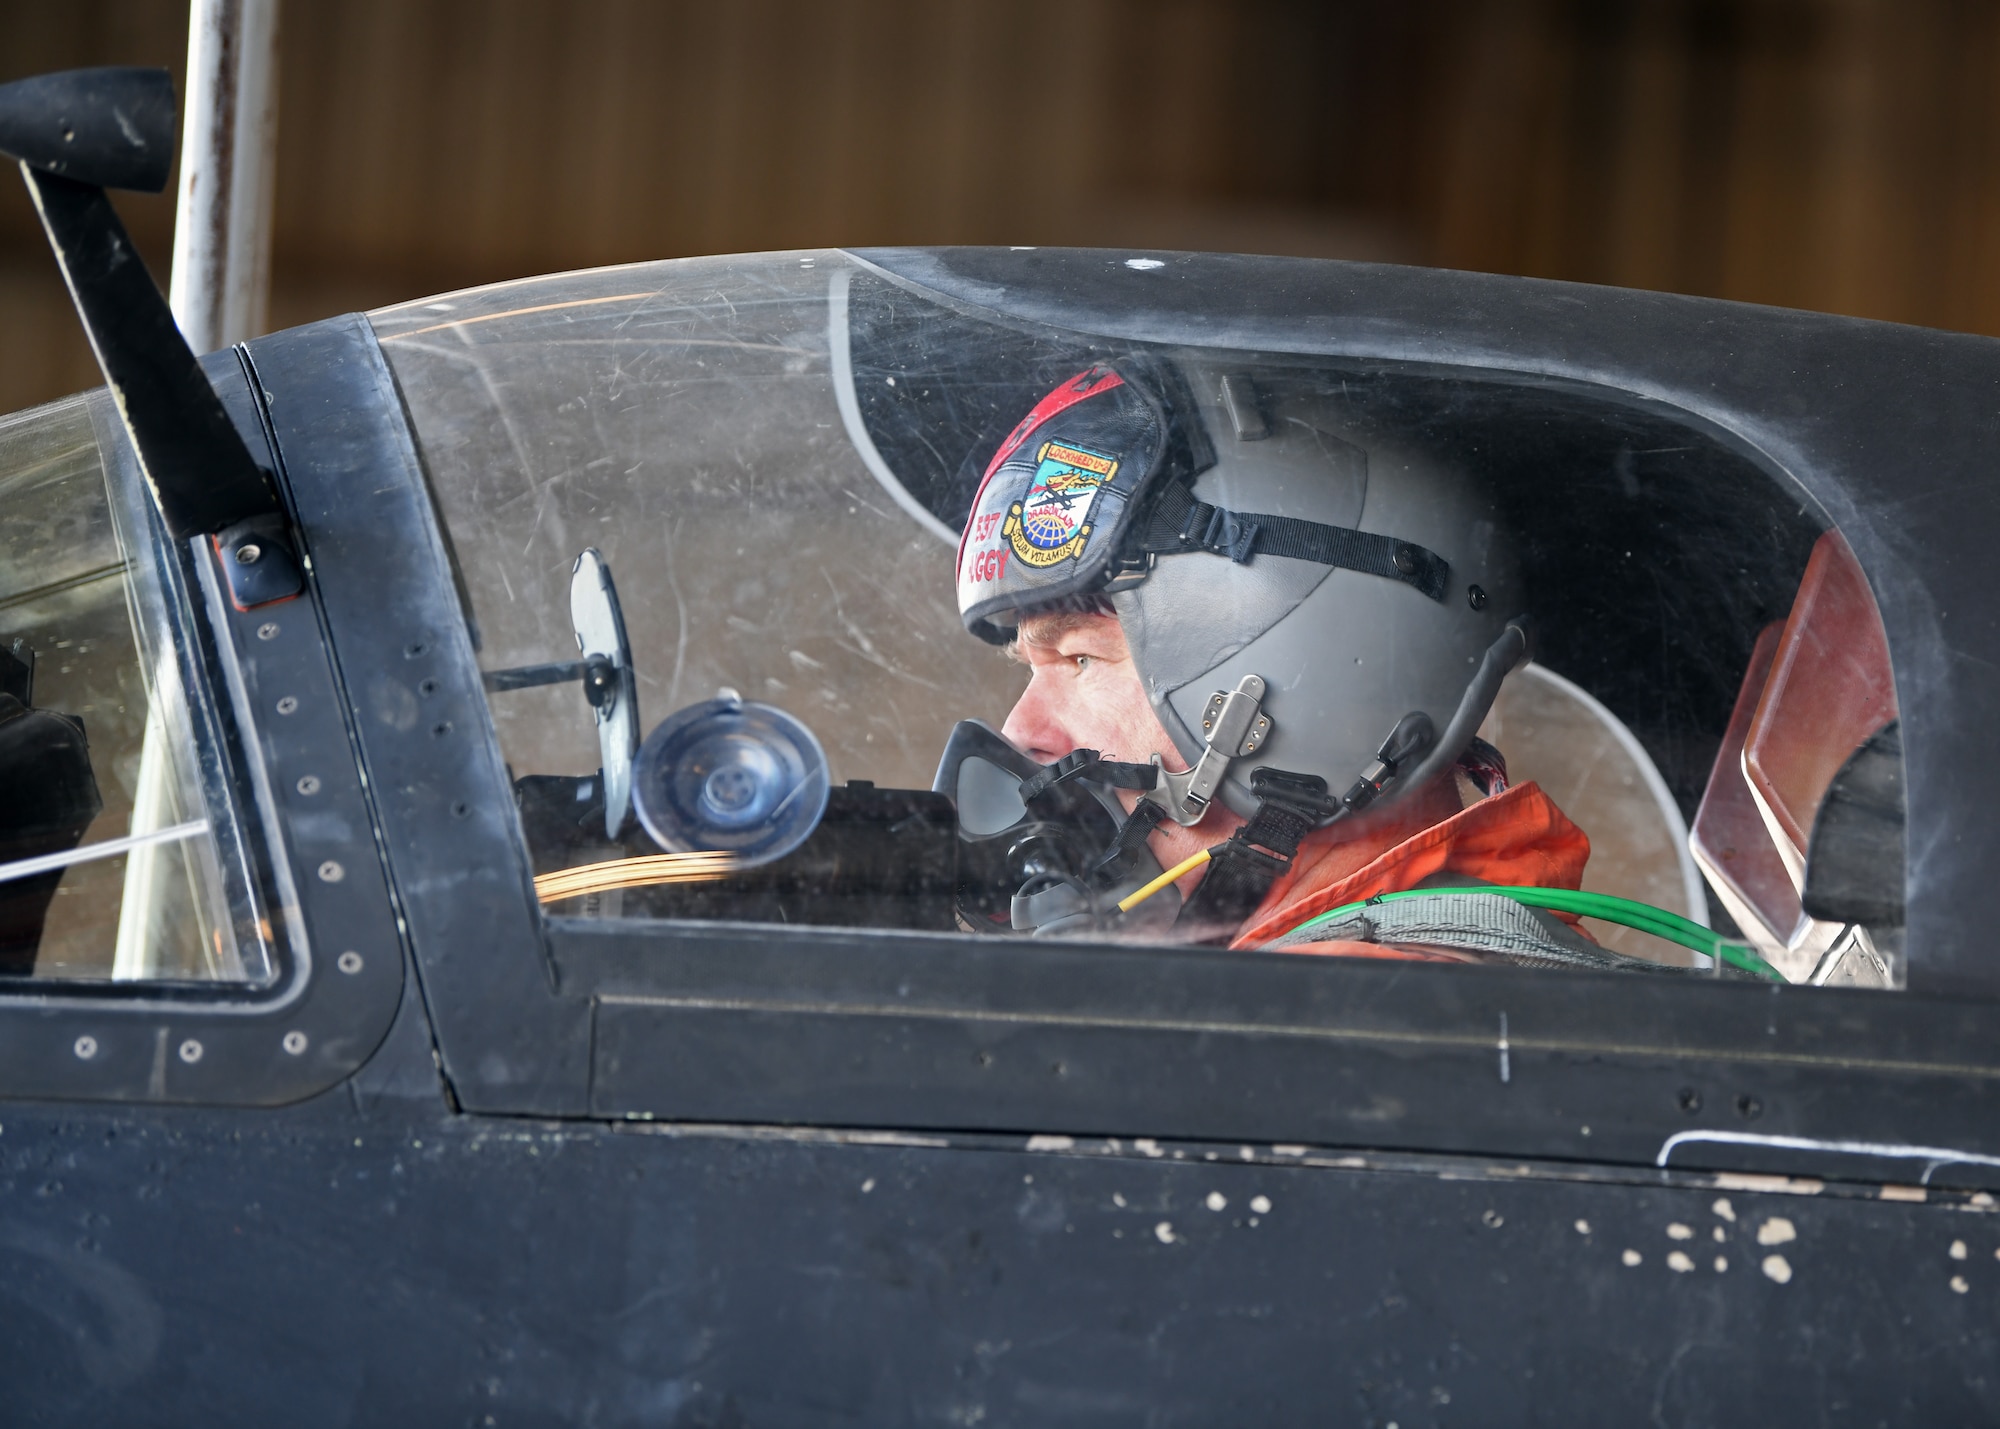 Retired Lt. Col Jonathan Huggins, 1st Reconnaissance Squadron U-2 instructor pilot, prepares to taxi a U-2 Dragon Lady before takeoff July 31, 2020 at Beale Air Force Base, California. The U-2 Dragon Lady is widely accepted as the most difficult aircraft in the world to fly with only about 16 new pilots coming into the  U-2 program each year. (U.S. Air Force photo by Airman 1st Class Luis A. Ruiz-Vazquez)